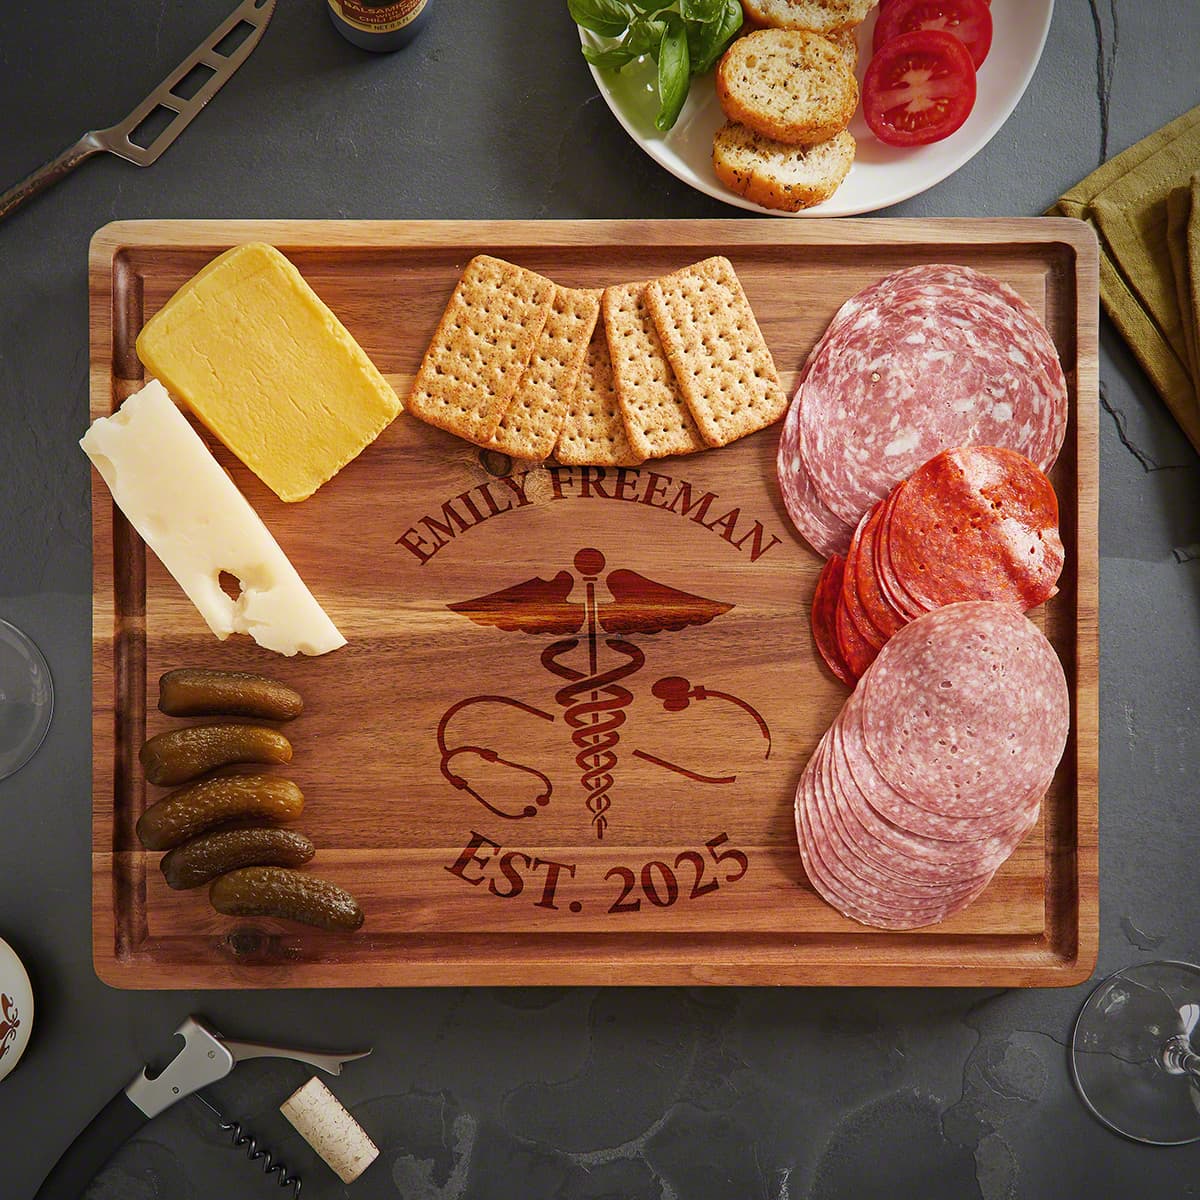 Acacia Engraved Hardwood Cutting Board - (1.5in Thick)